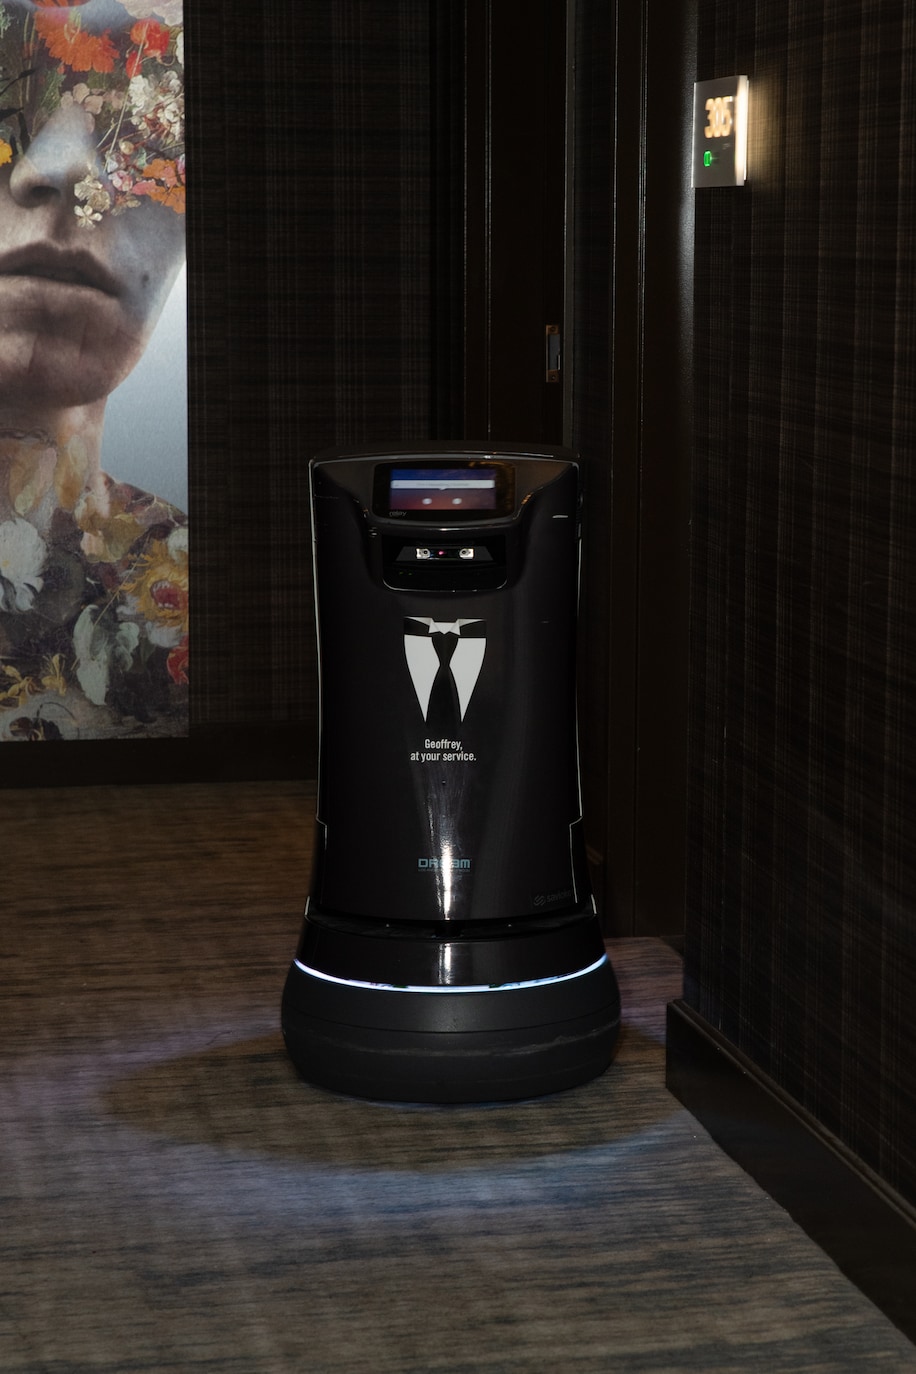 Image showing a robot hotel worker